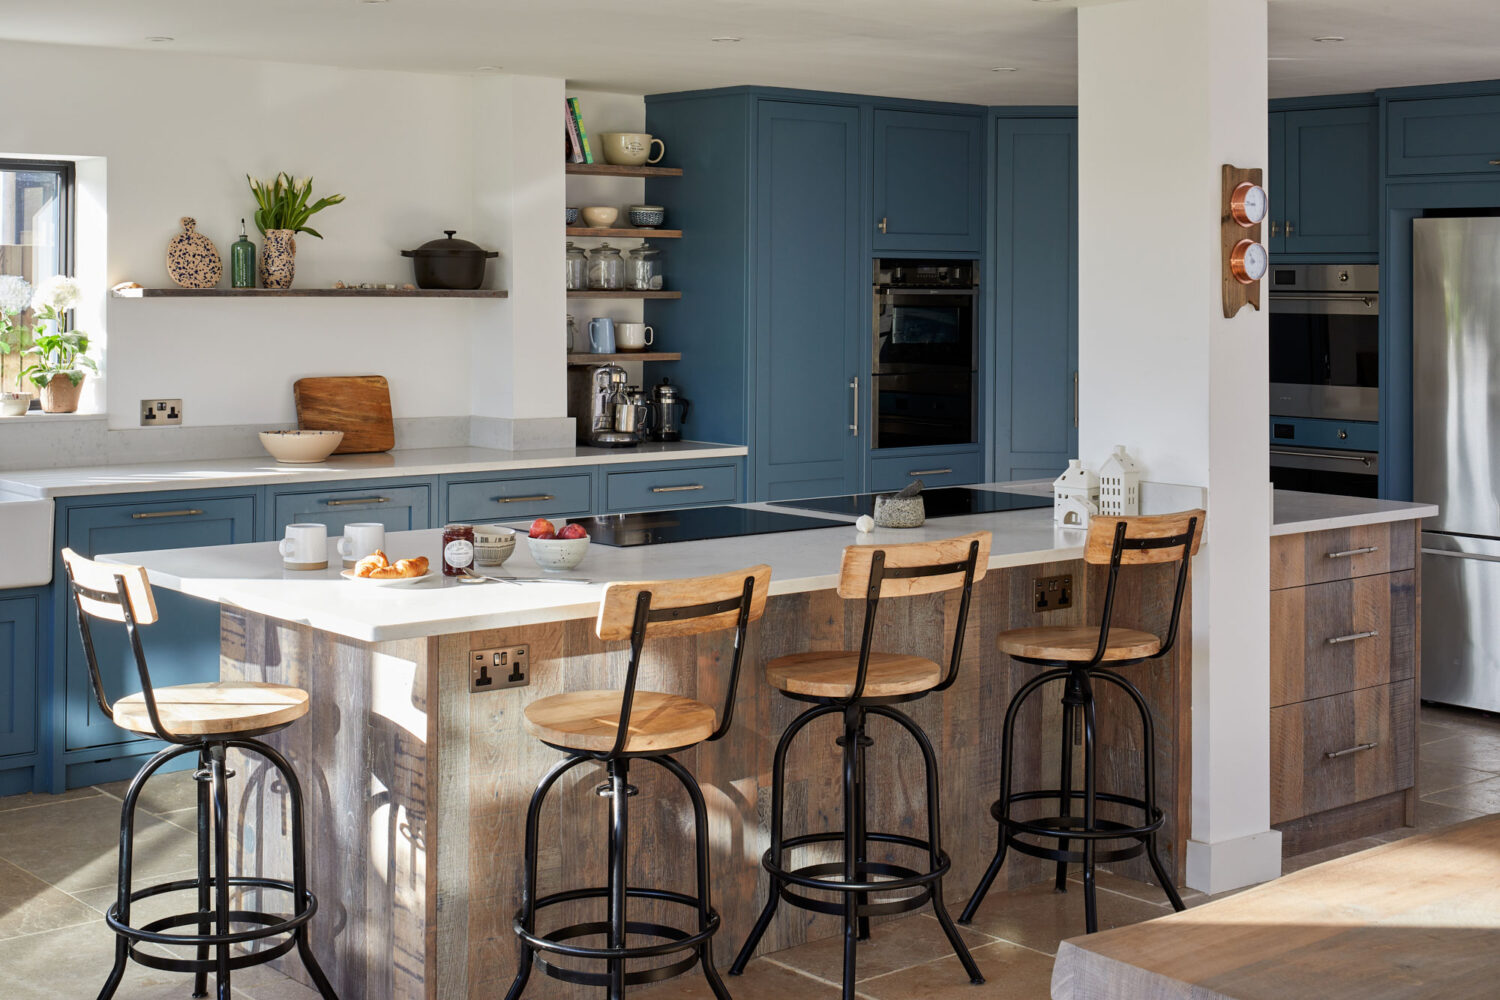 island kitchen with wood cabinets in a blue shaker style kitchen